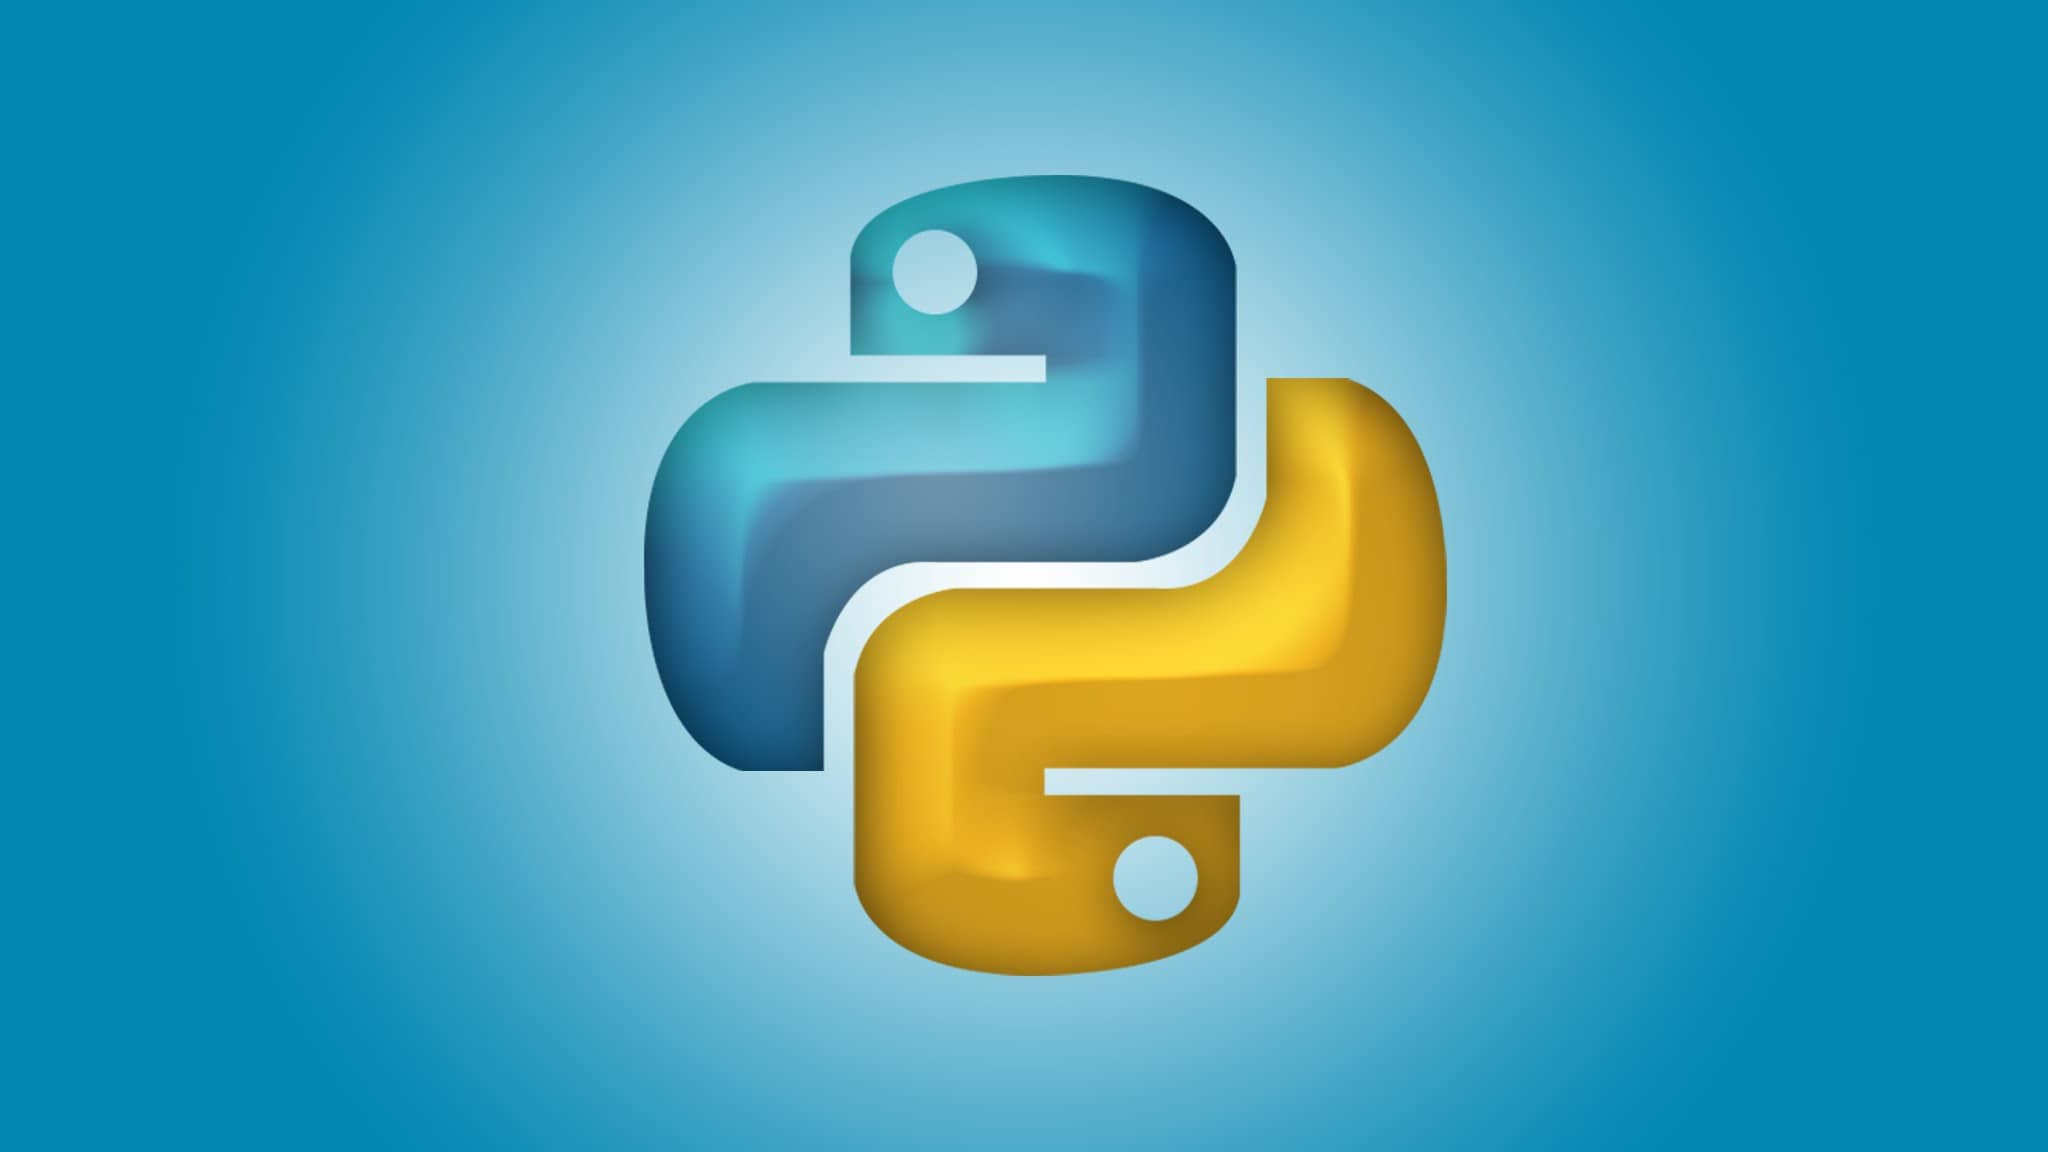 Python security pitfalls and how to avoid them